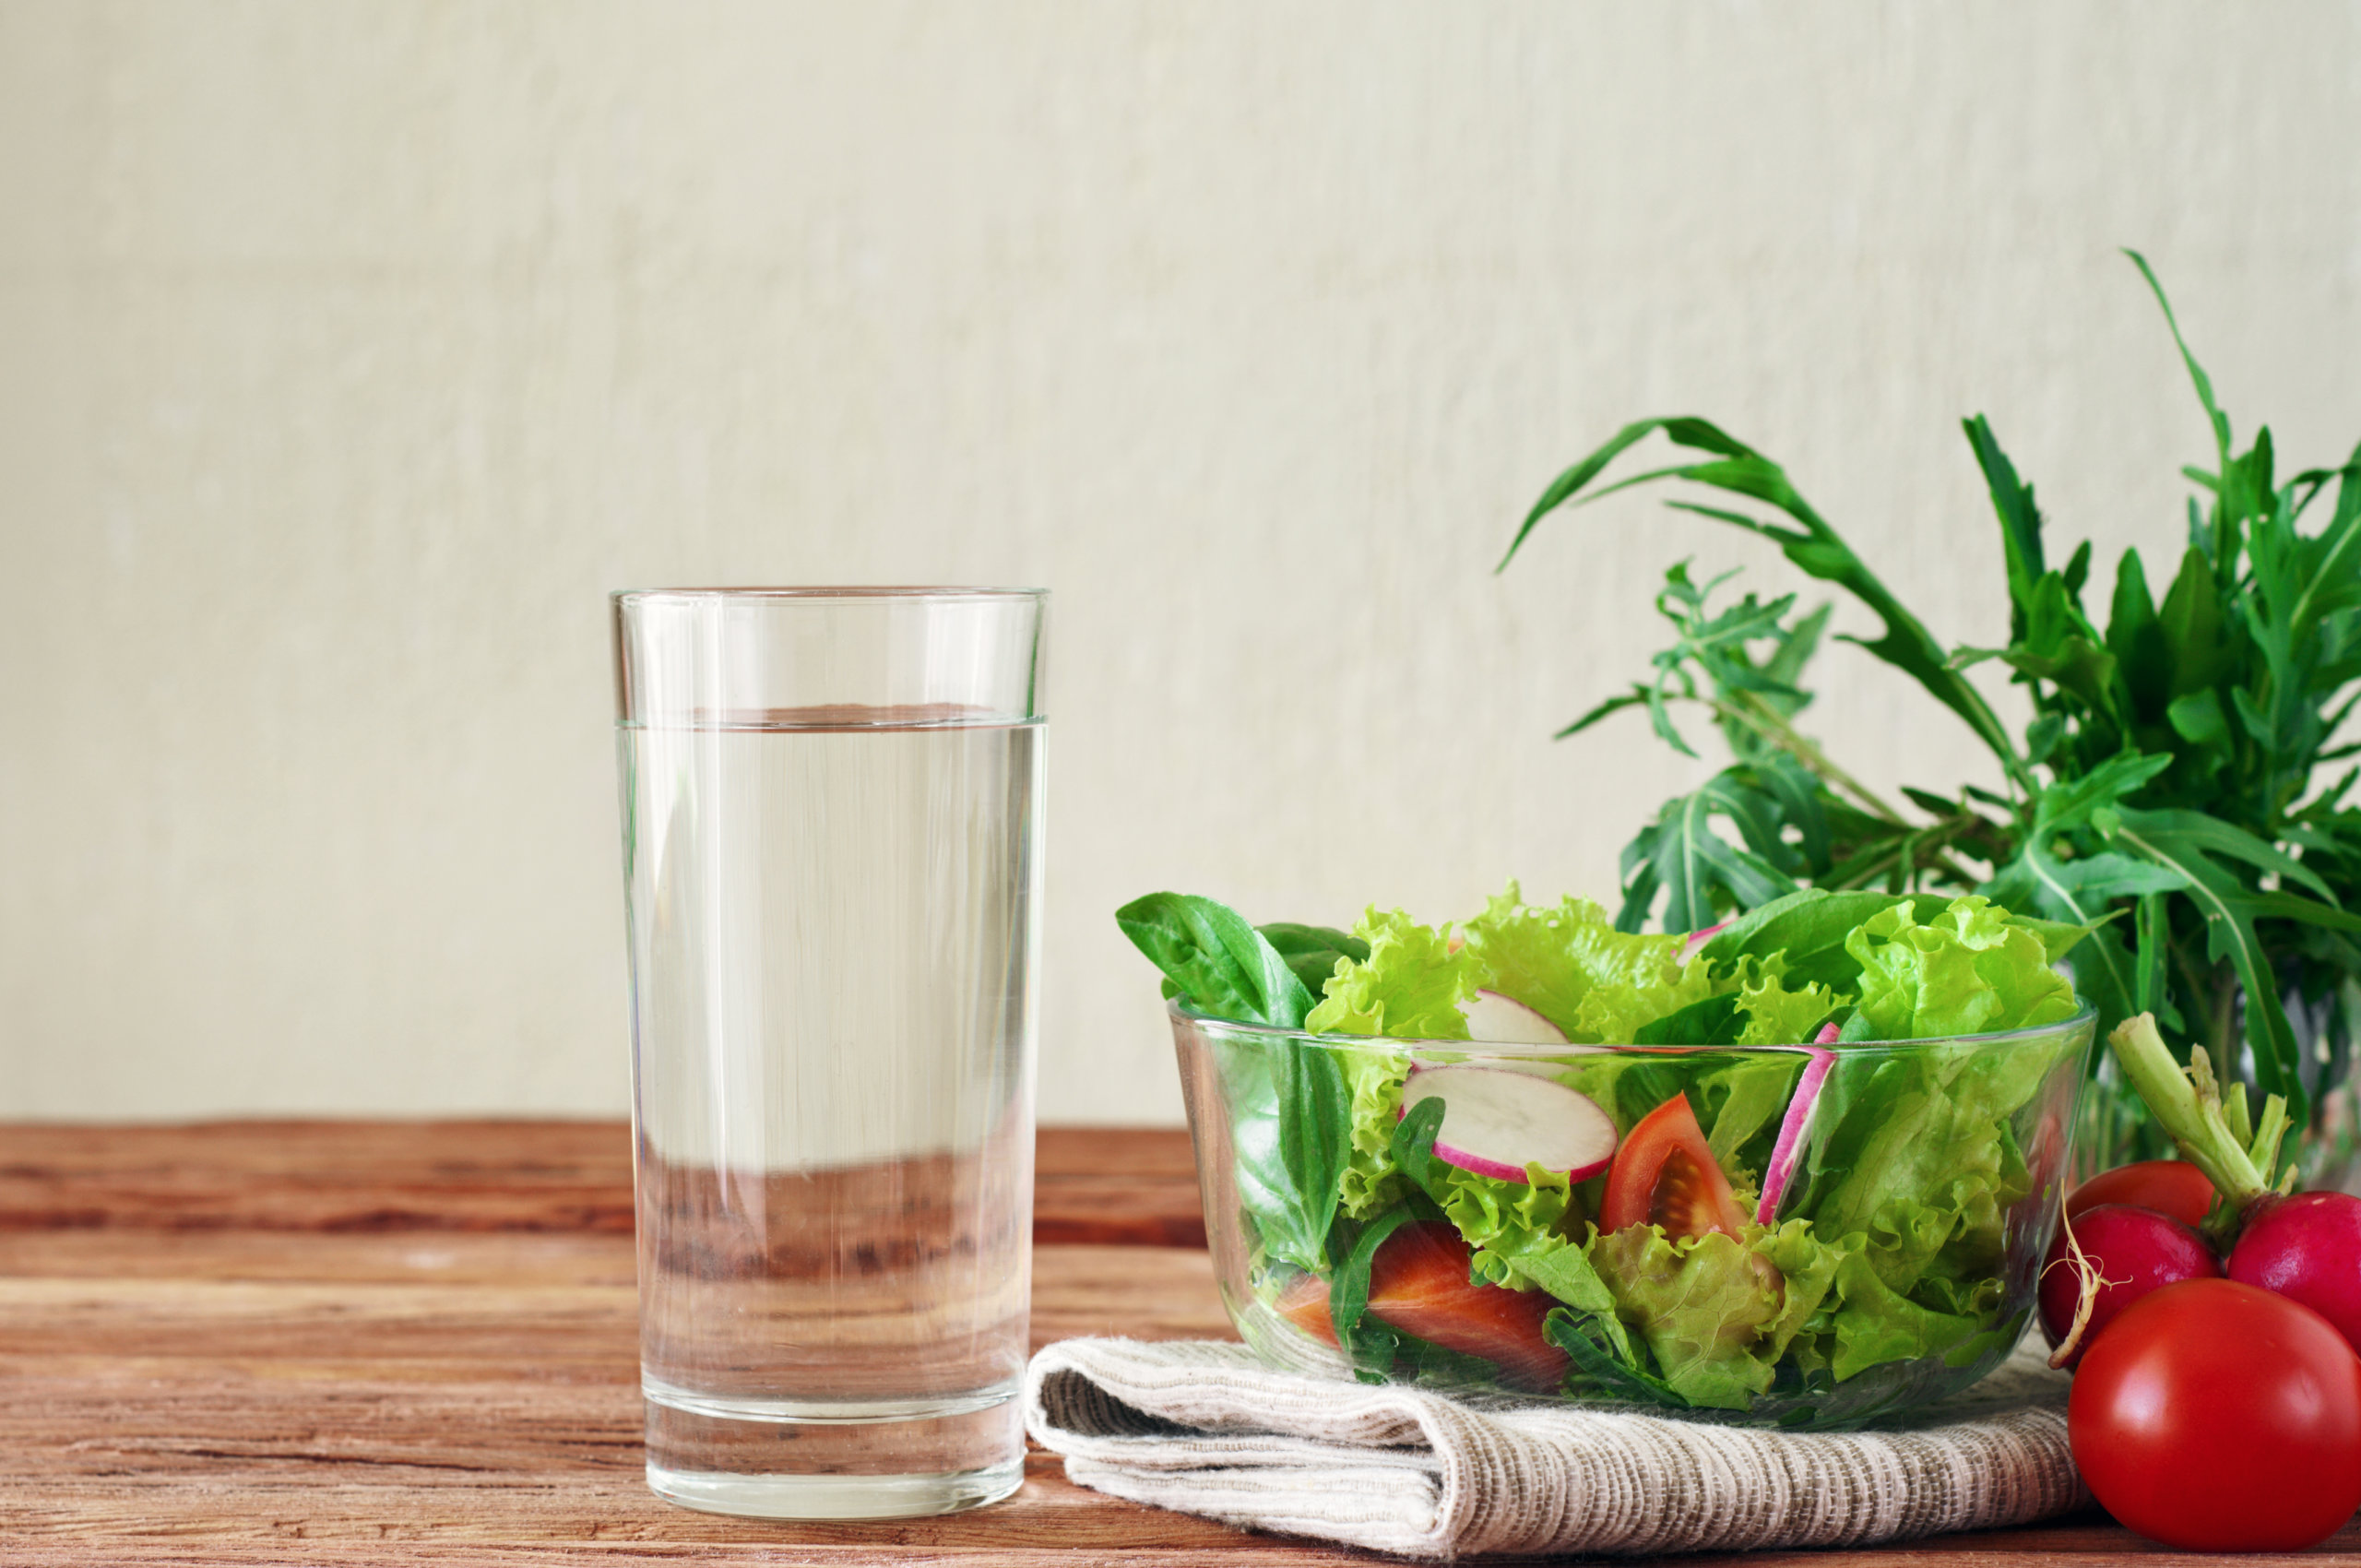 glass of water on table next to salad